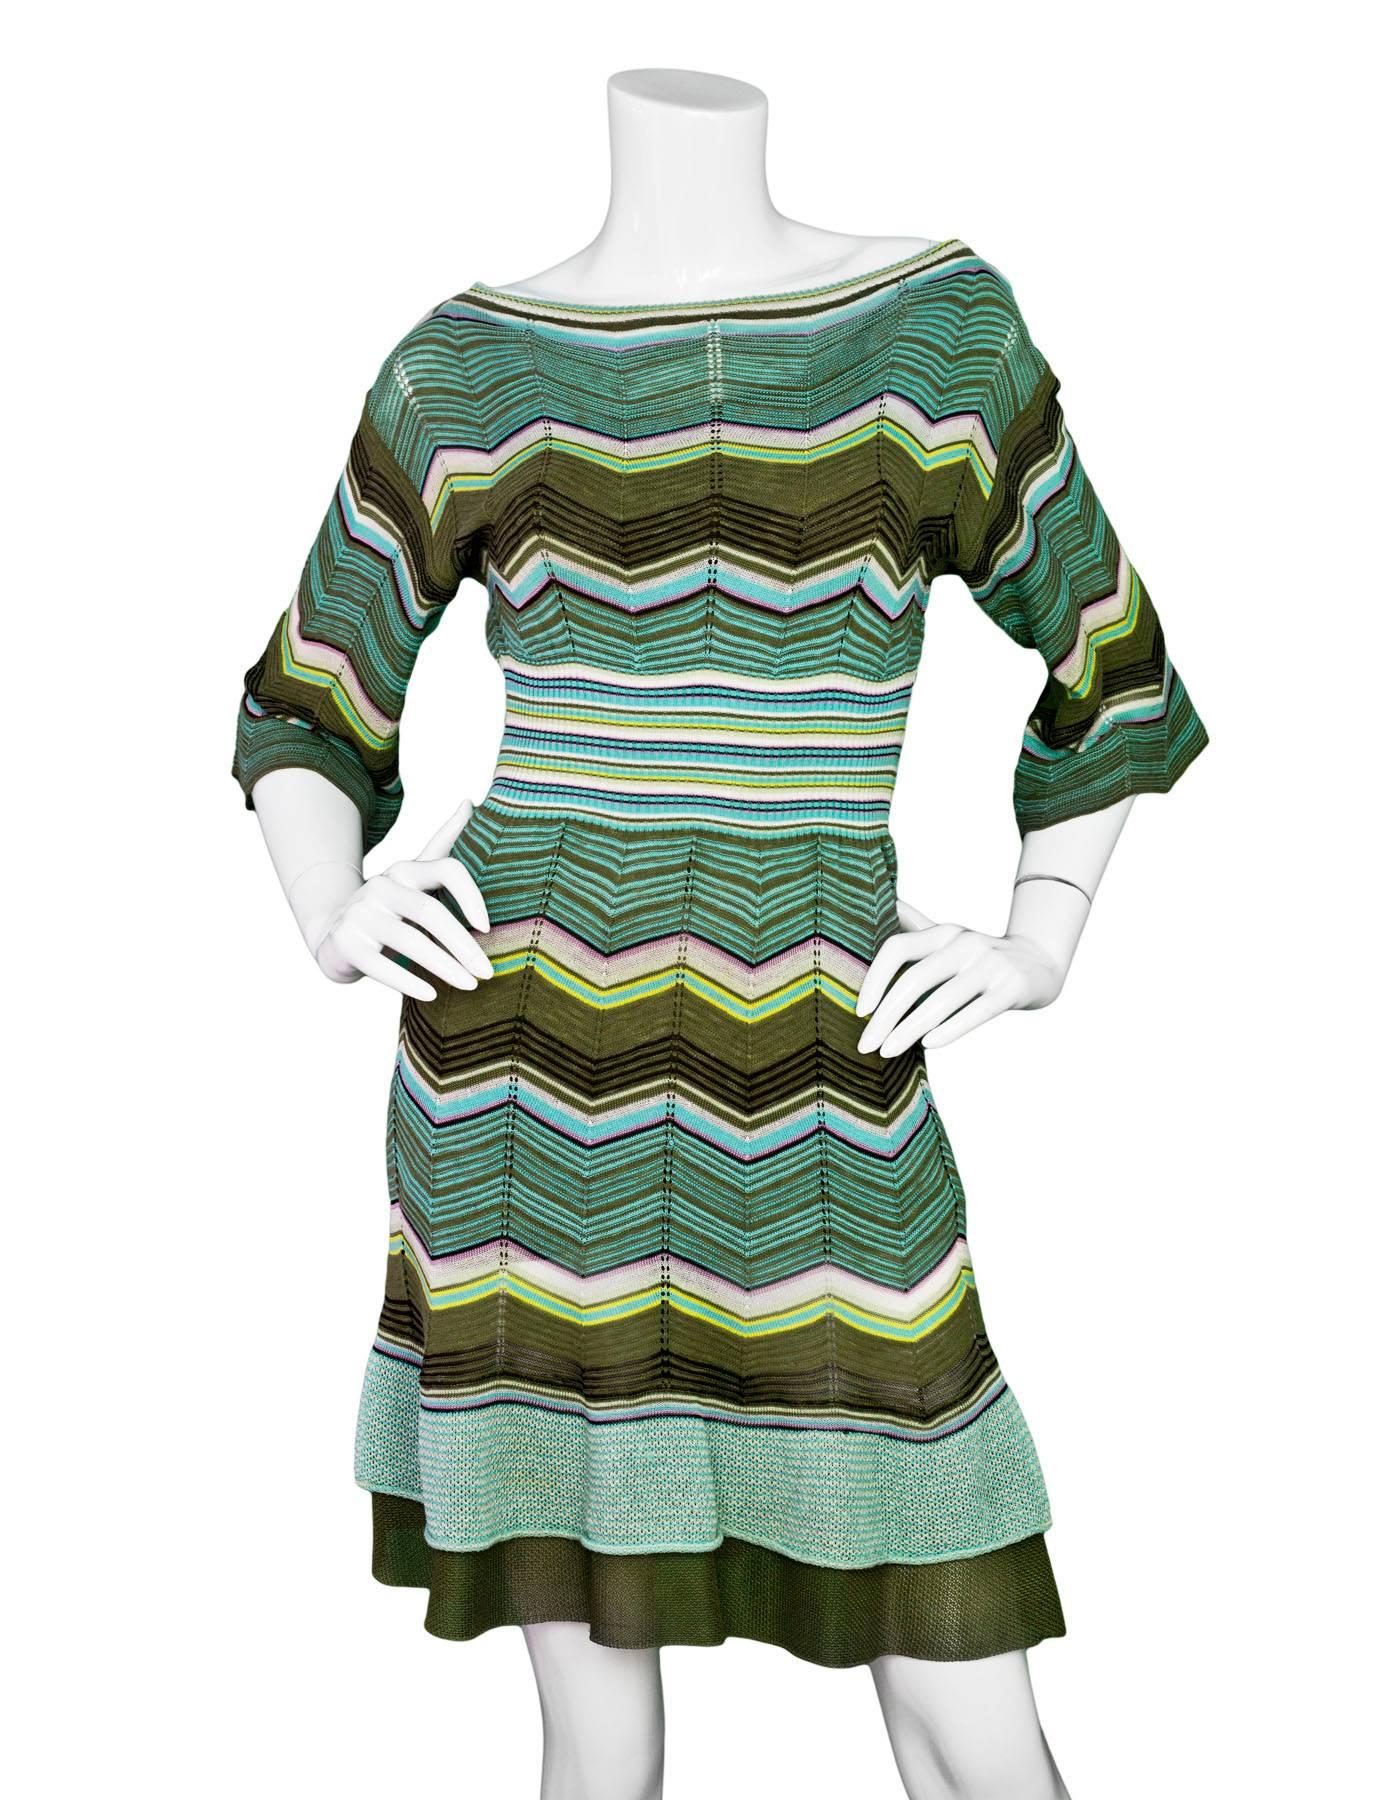 M Missoni Green Knit 3/4 Sleeve Dress 
Features olive green slip under dress

Made In: Italy
Color: Green, blue, purple, yellow and white
Composition: Not given- believed to be a cotton blend
Lining: Slip- green, silk-blend
Closure/Opening: Pull